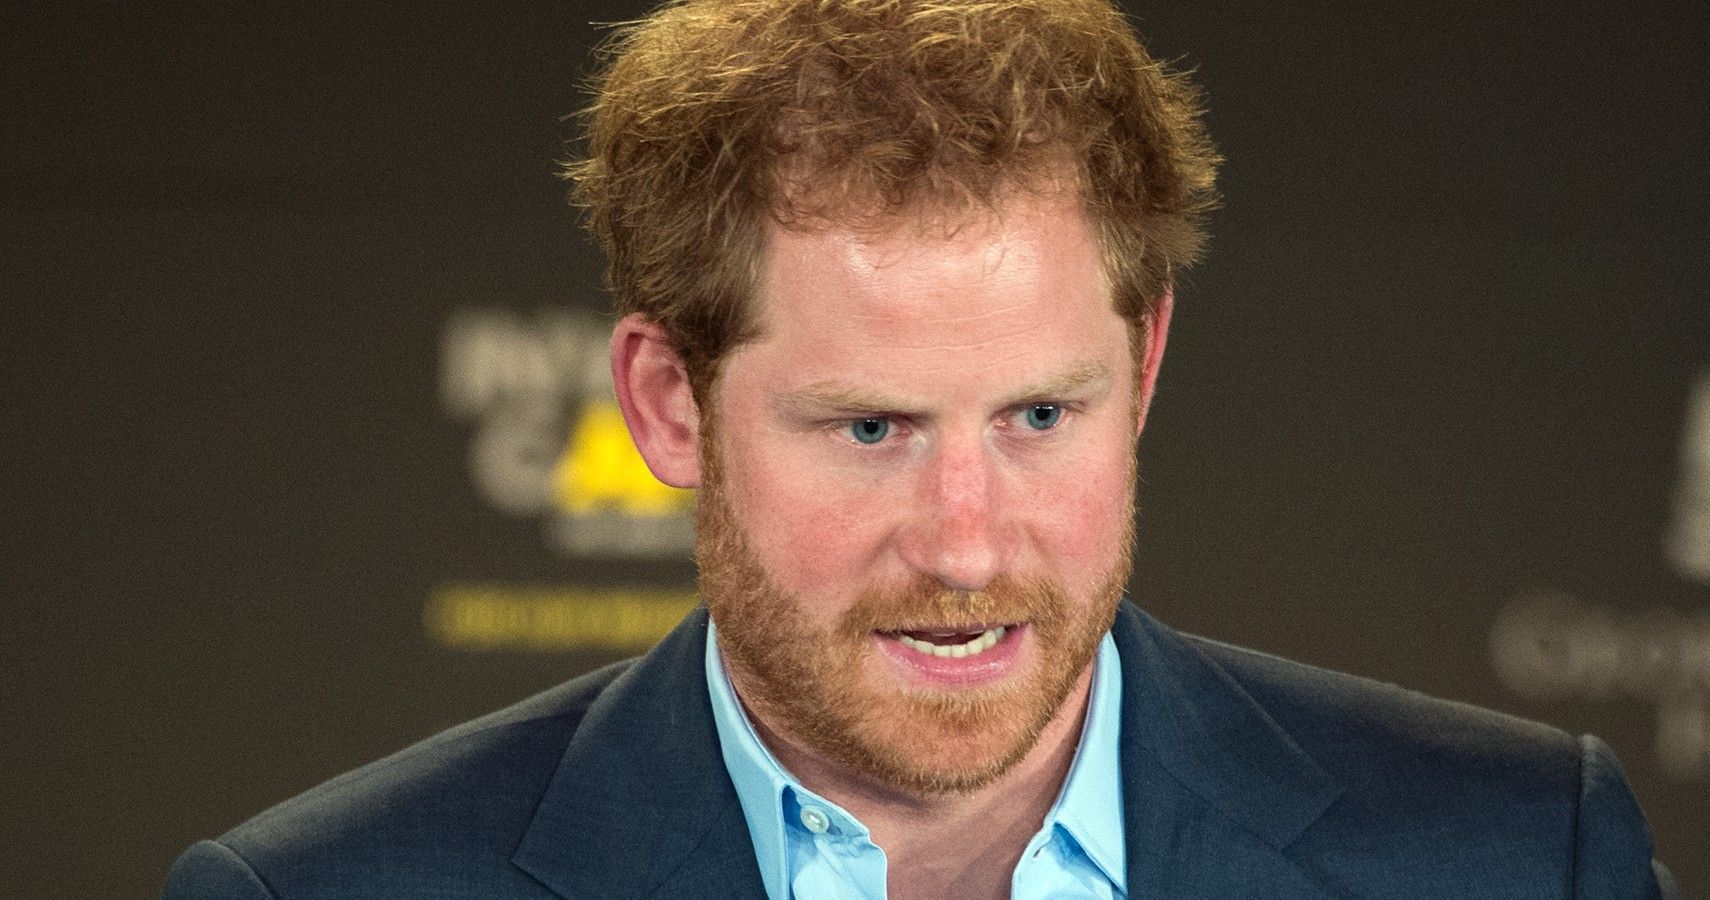 Prince Harry Gives First Update On Daughter Lili: She's A "Chilled" Baby